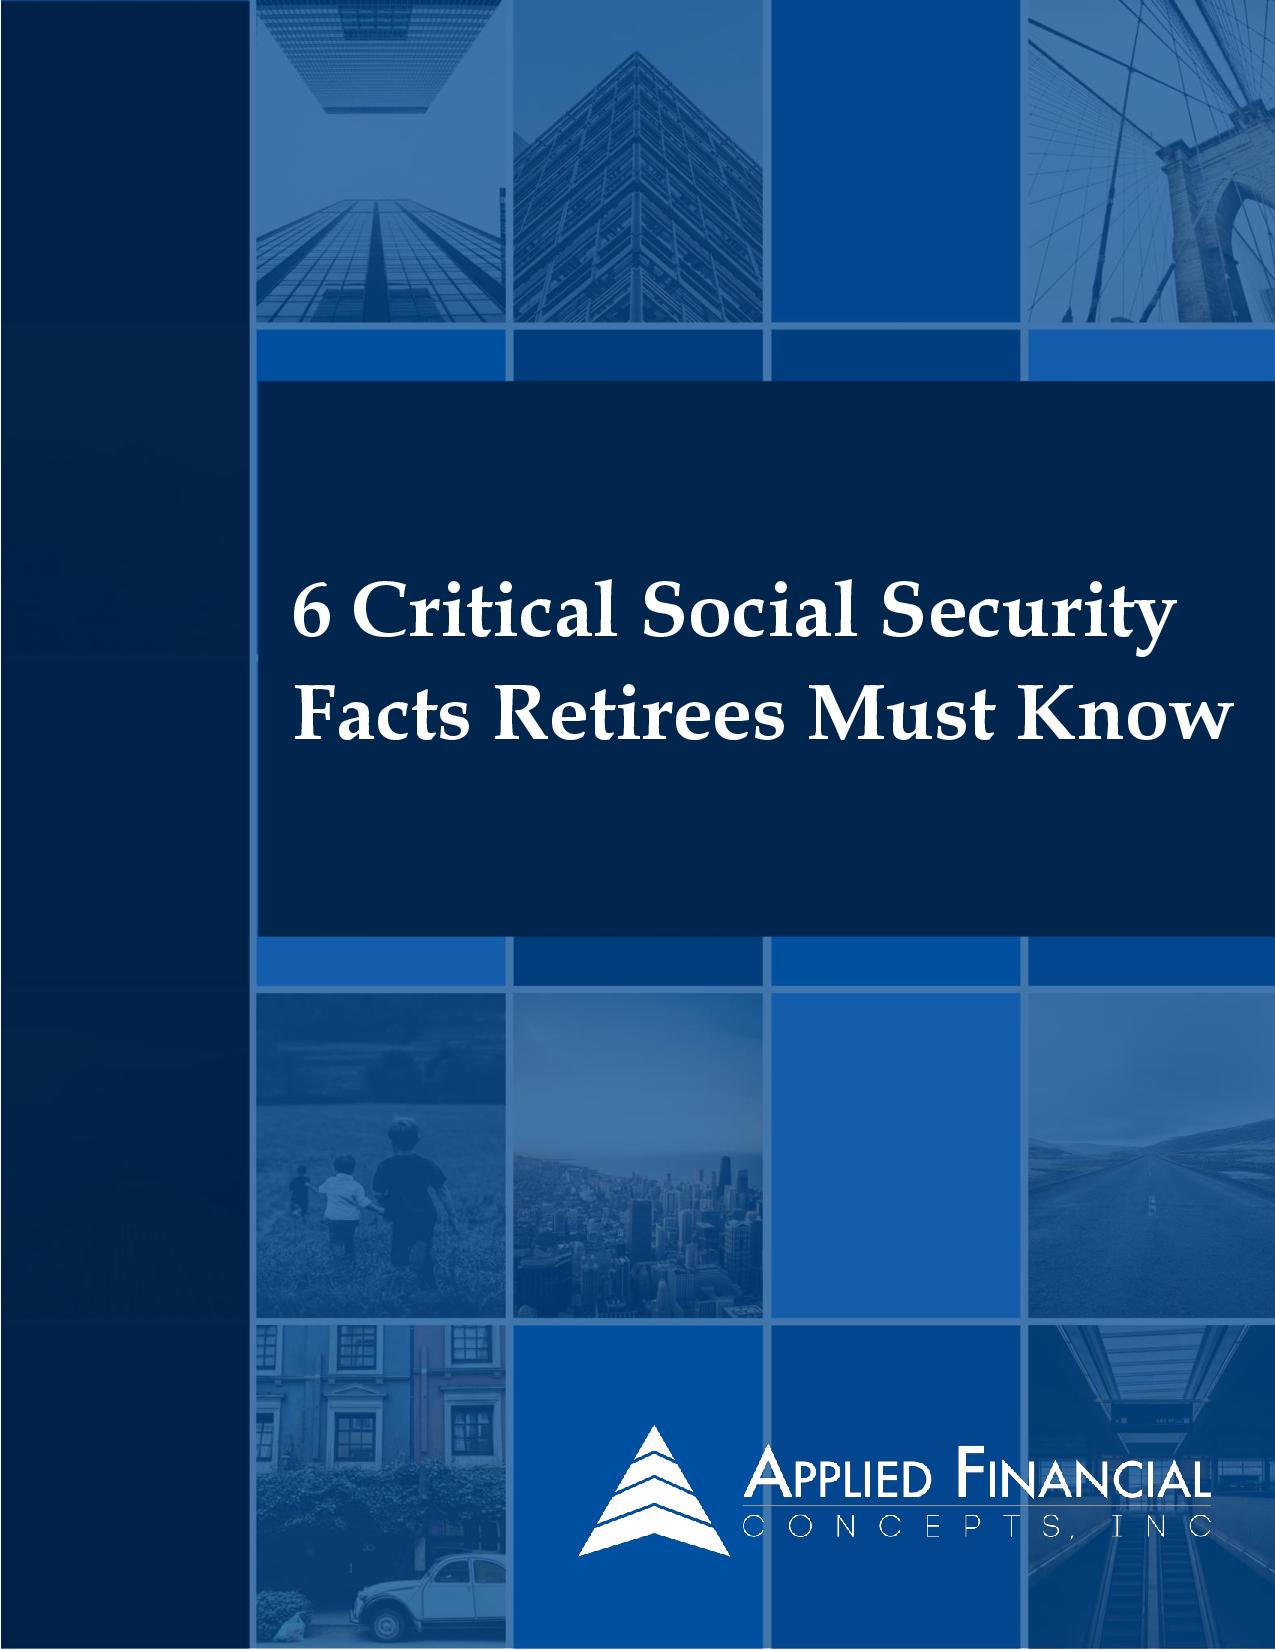 Social Security Guide picture.jpg